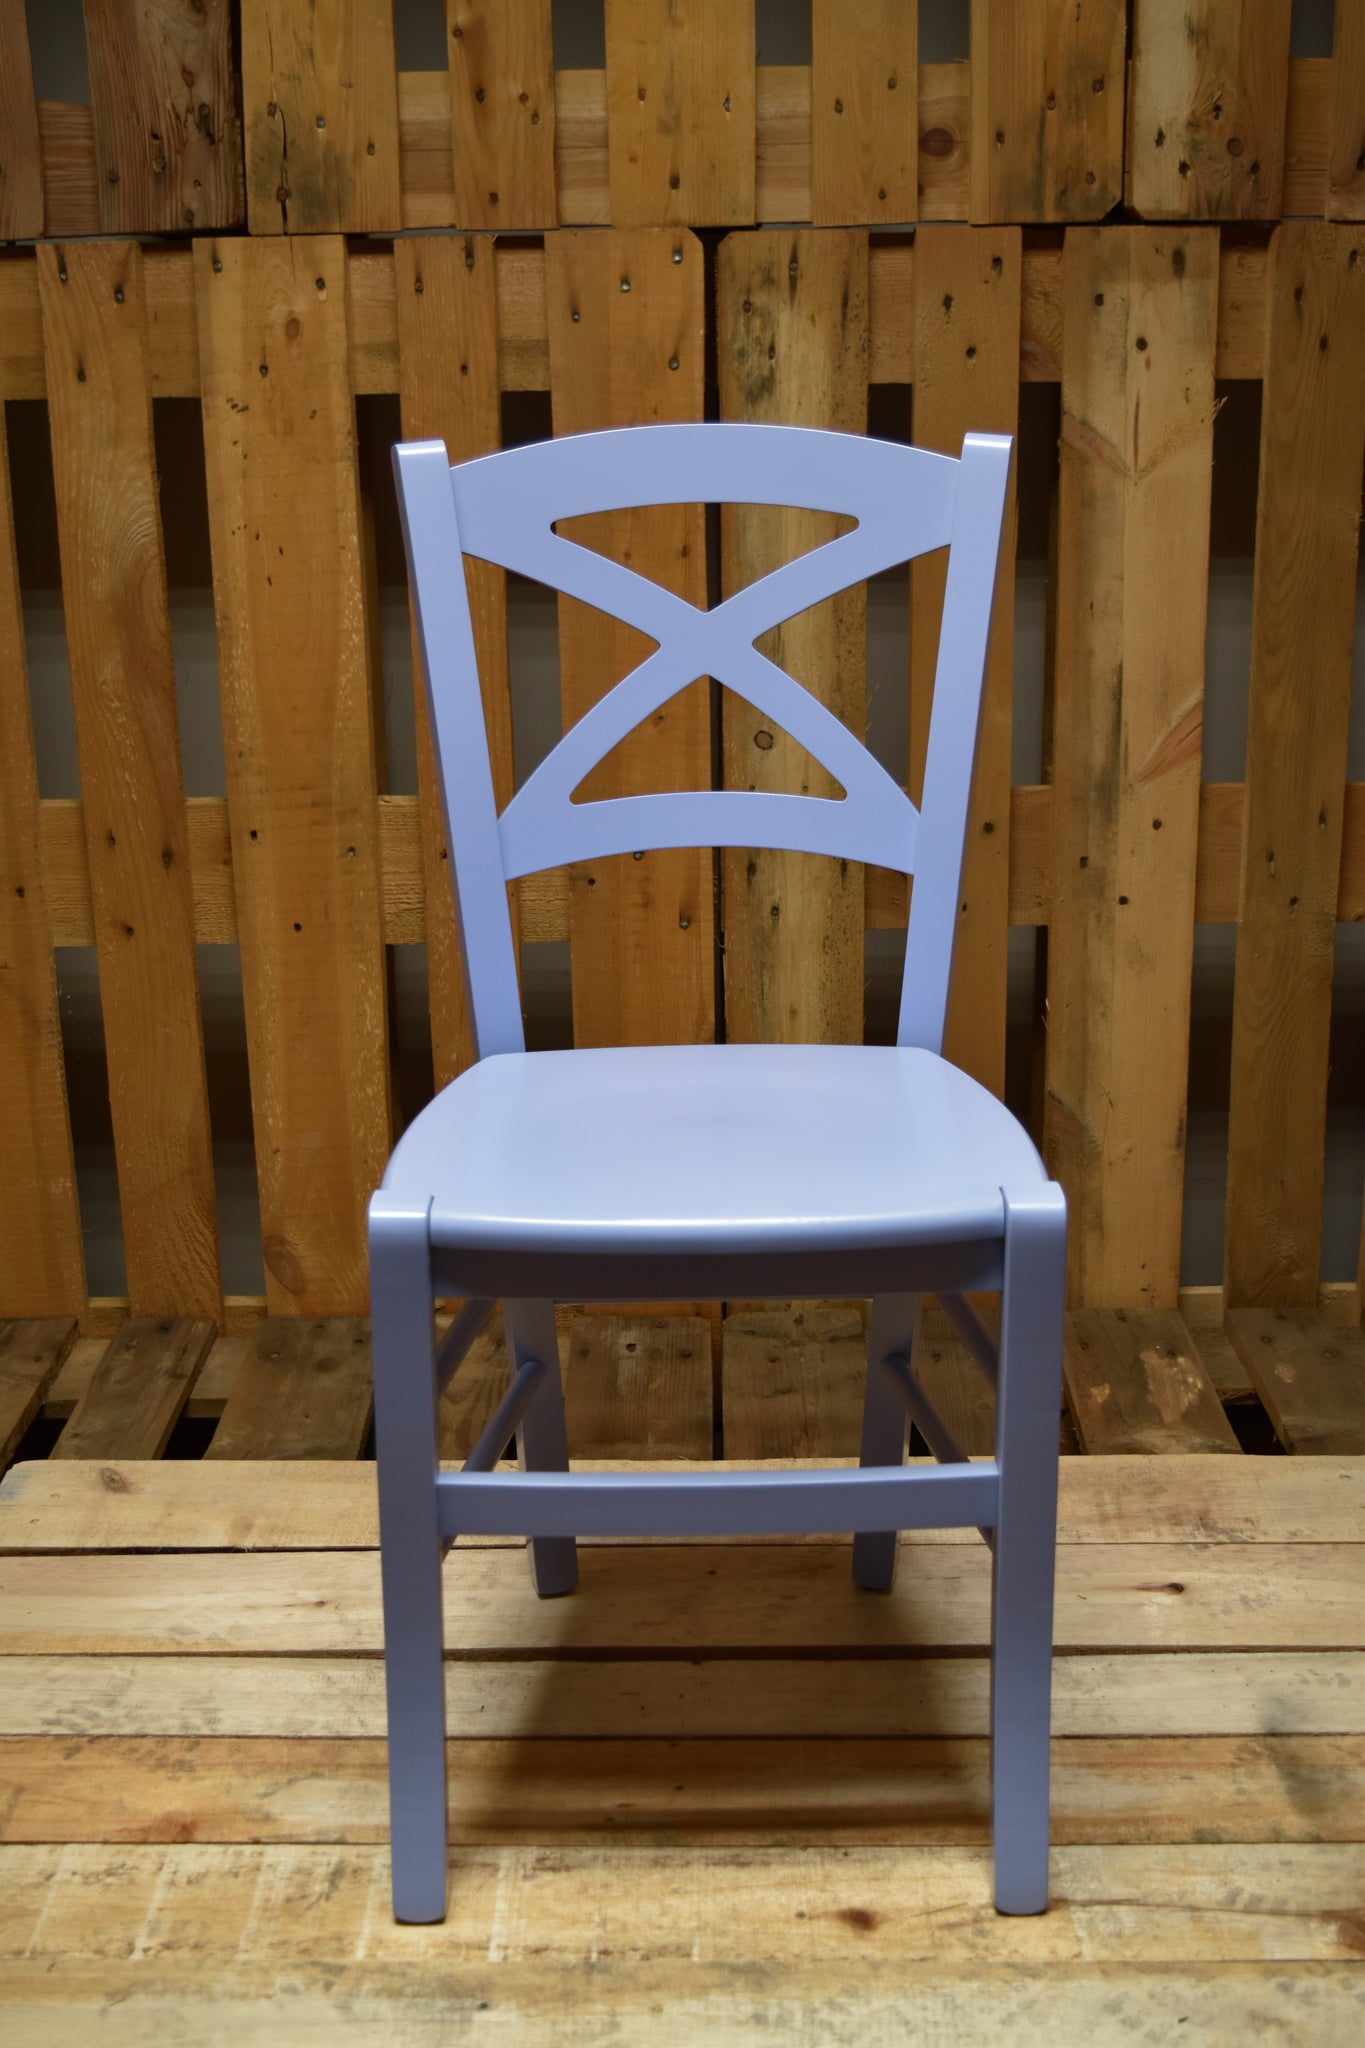 Stock chairs model 33, light blue color, wooden seat